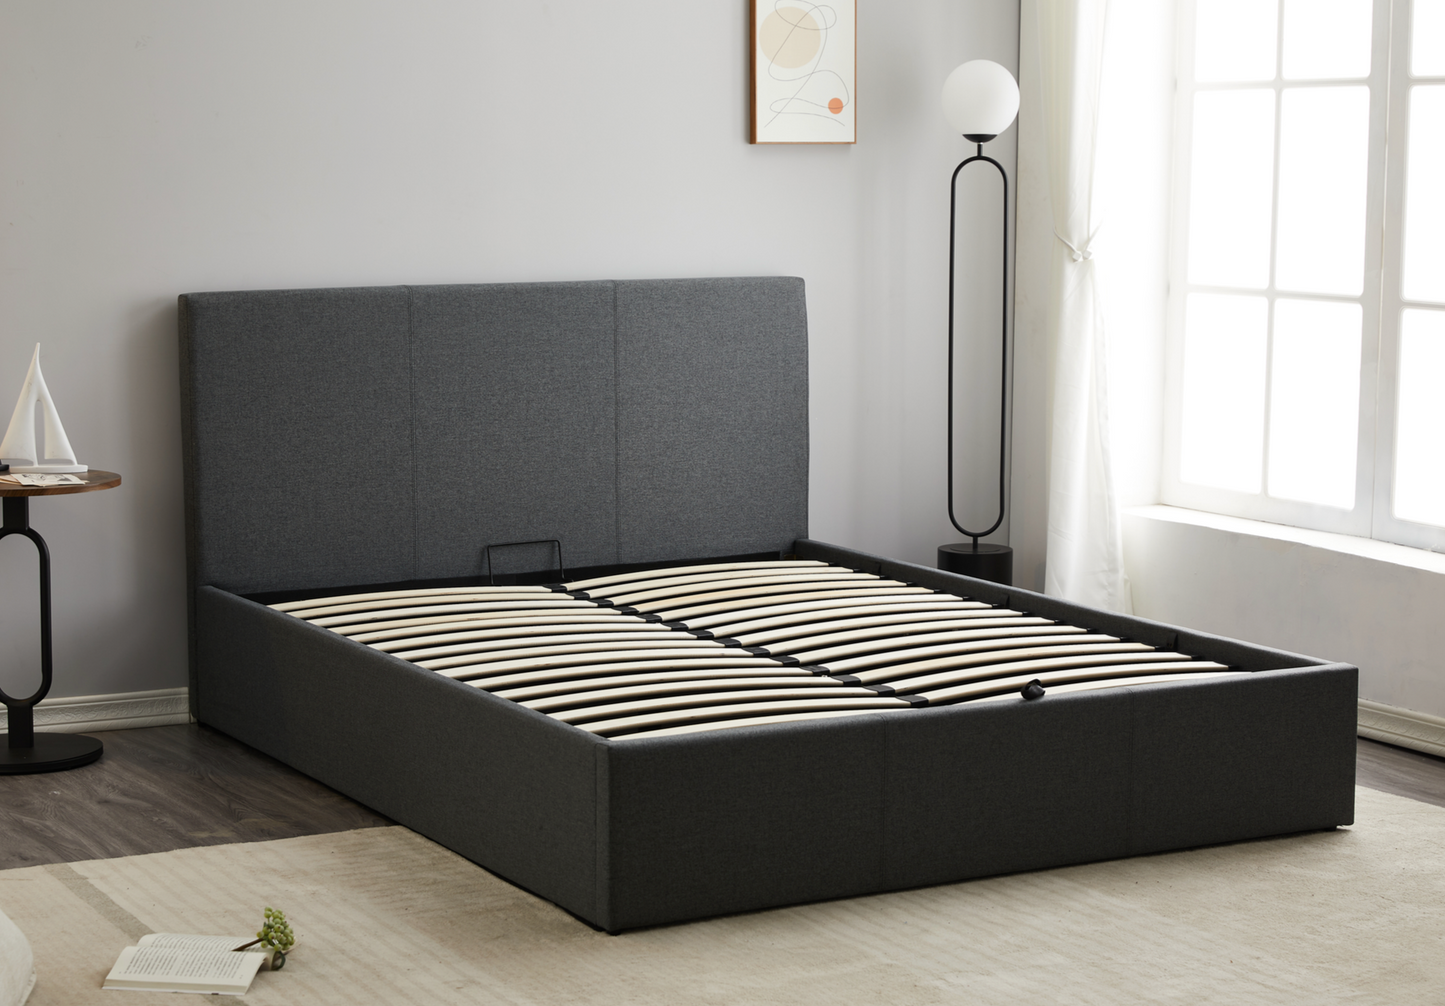 Monarch Grey Fabric Lift-up Storage Queen Bed Frame